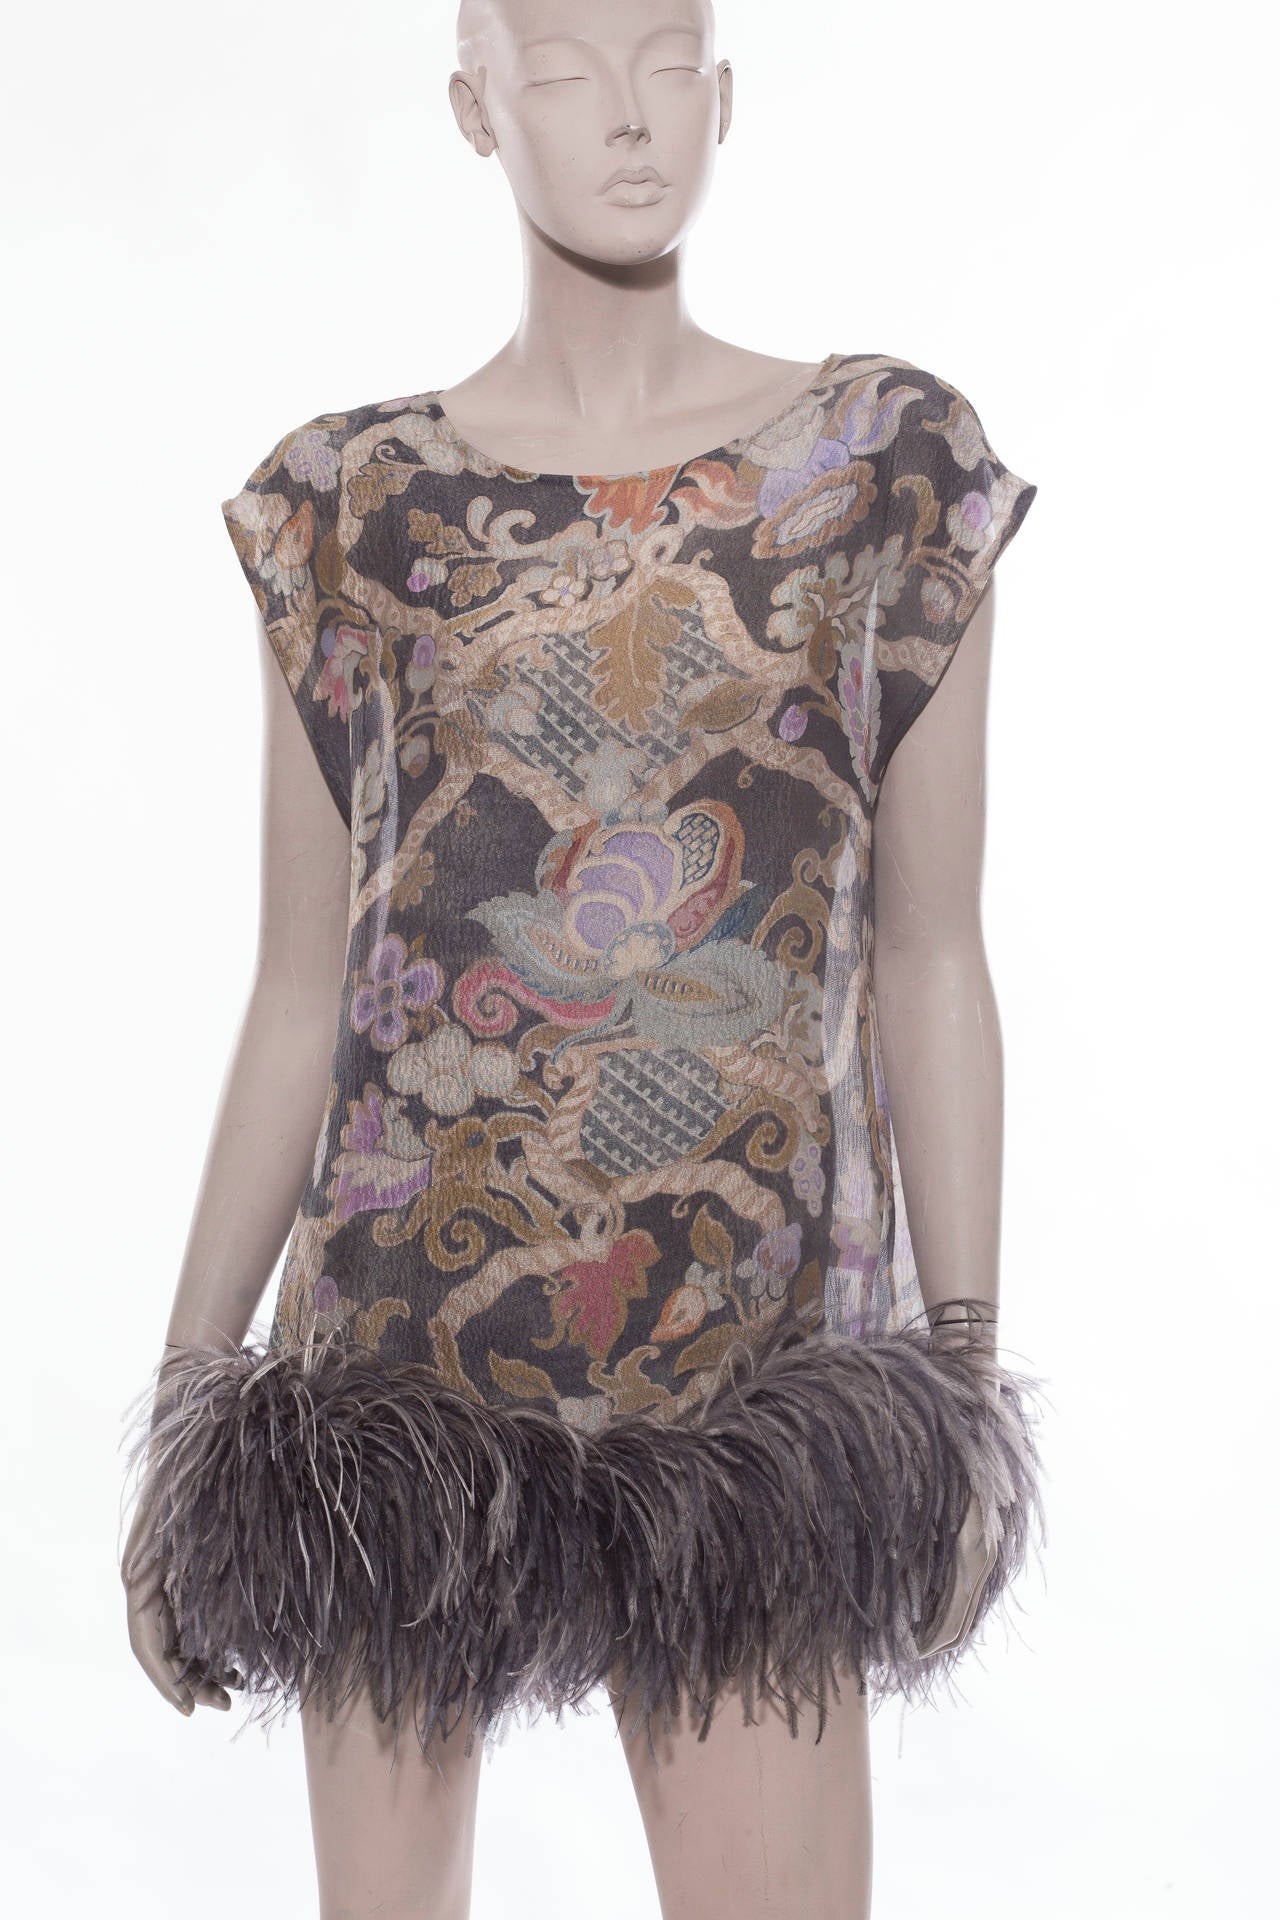 Dries Van Noten, Fall 2013 Grey and silk printed sleeveless tunic with feather trim and scoop neckline.

Bust 44